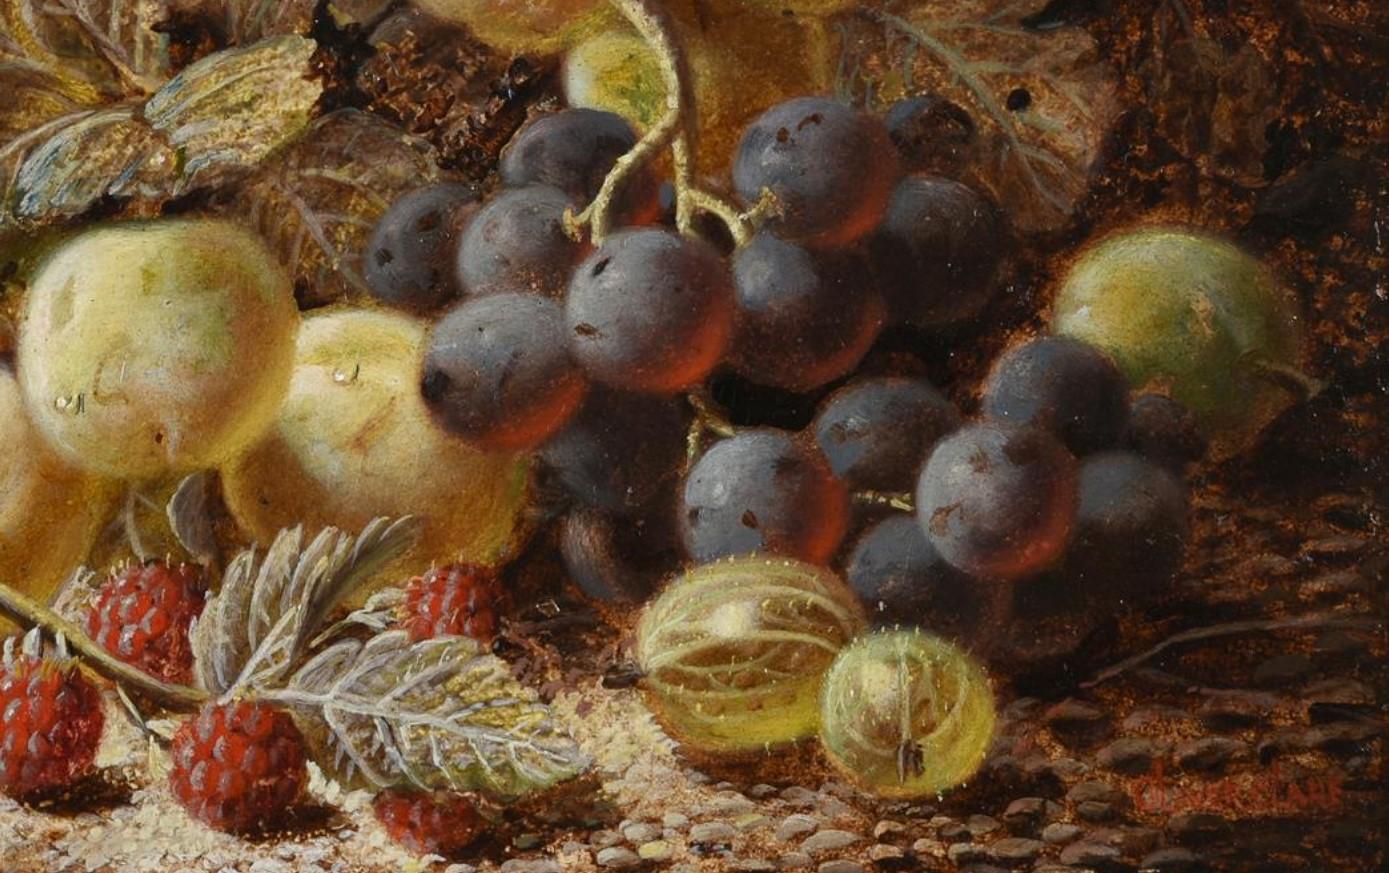 Still Life of Fruit on a Mossy Bank
by Oliver Clare (British 1853-1927)
signed lower right
oil painting on board: 6.5 x 9.25 inches
framed: 13 x 16 inches
condition: excellent
provenance: private collection, UK